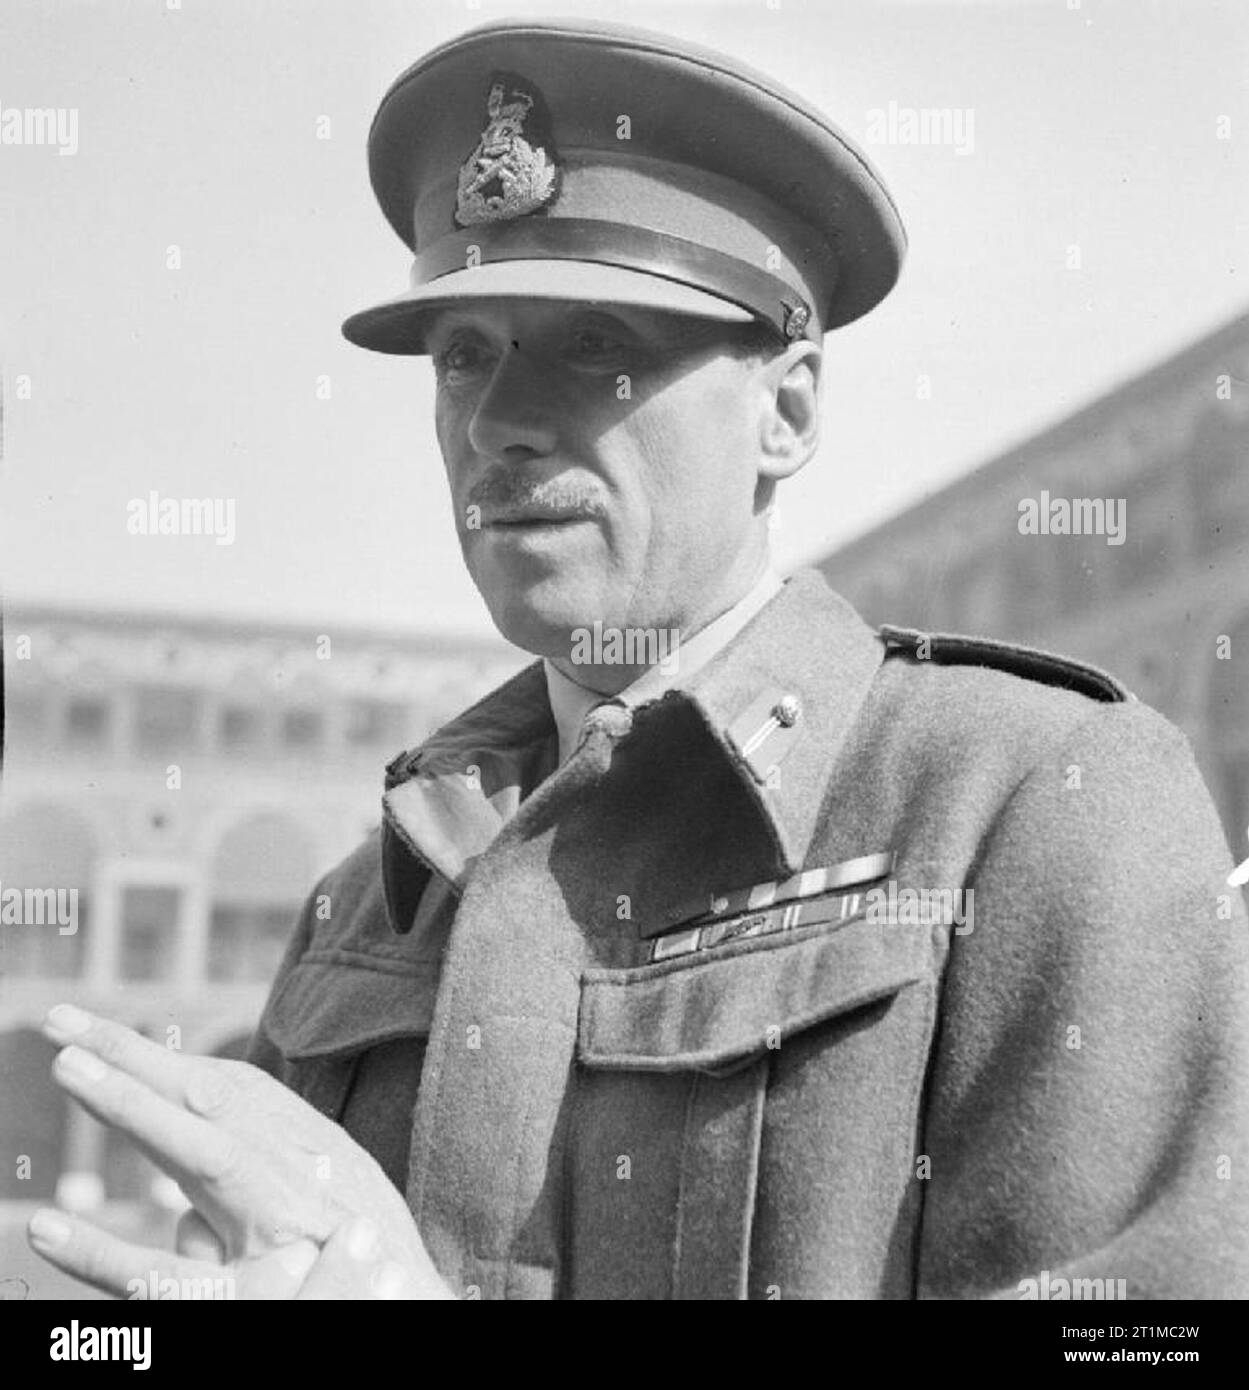 British Generals 1939-1945 Major General John 'Jock' Campbell VC (1894 - 1942): Campbell at his investiture with the Victoria Cross by the Commander in Chief, General Sir Claude Auchinleck. Campbell was awarded the VC for his action at Sidi Rezergh, 21 - 22 November 1941. Stock Photo